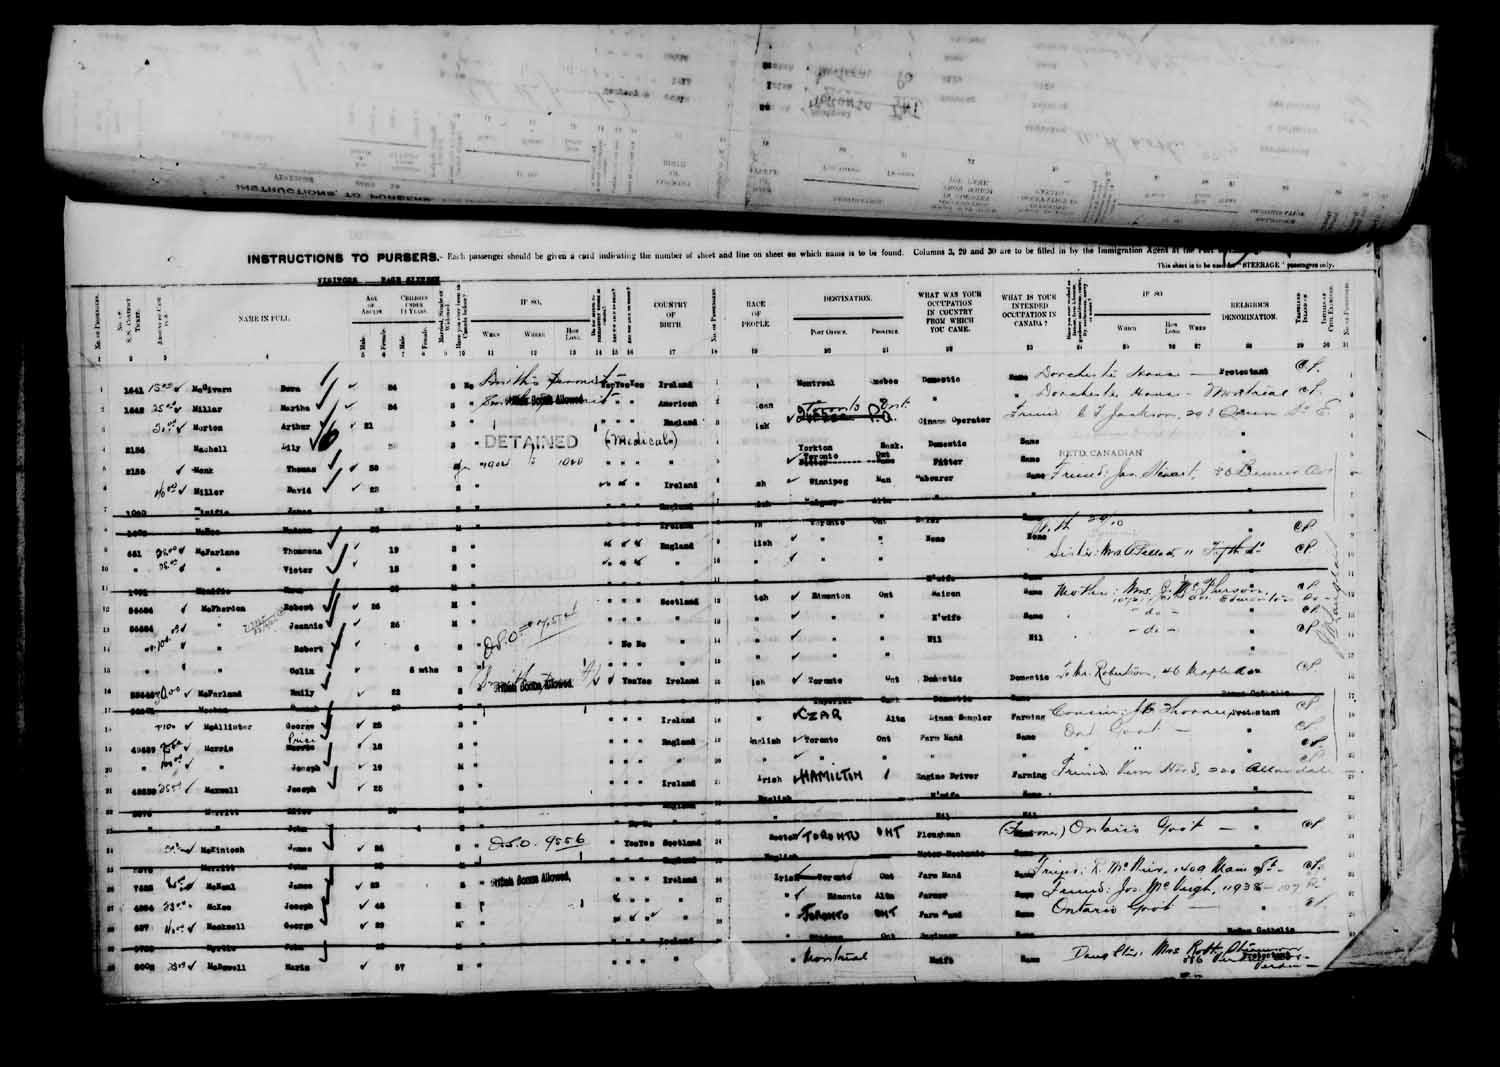 Digitized page of Passenger Lists for Image No.: e003610656